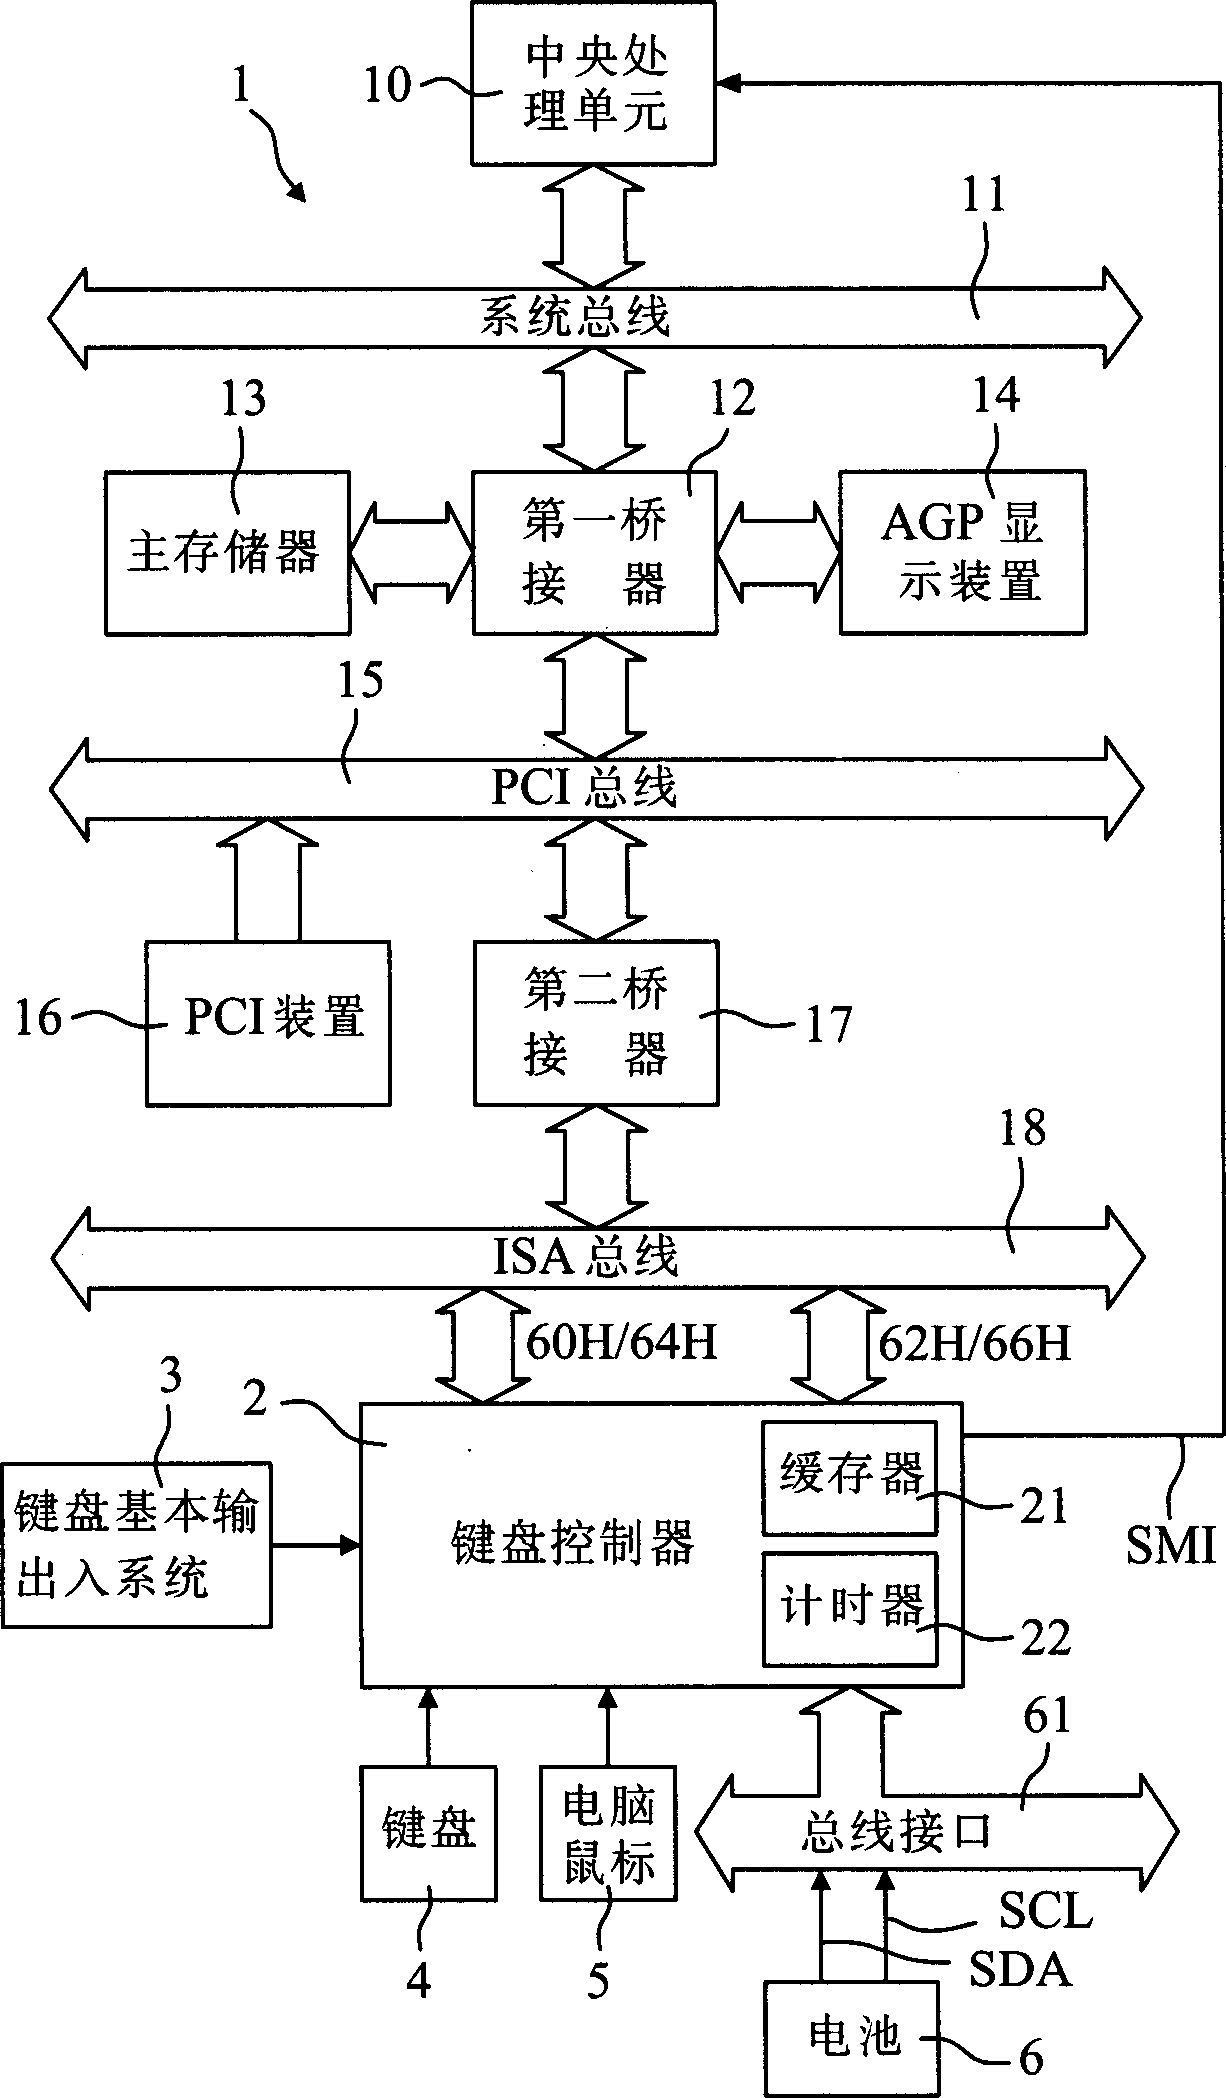 Power supply status automatic test method for computer apparatus